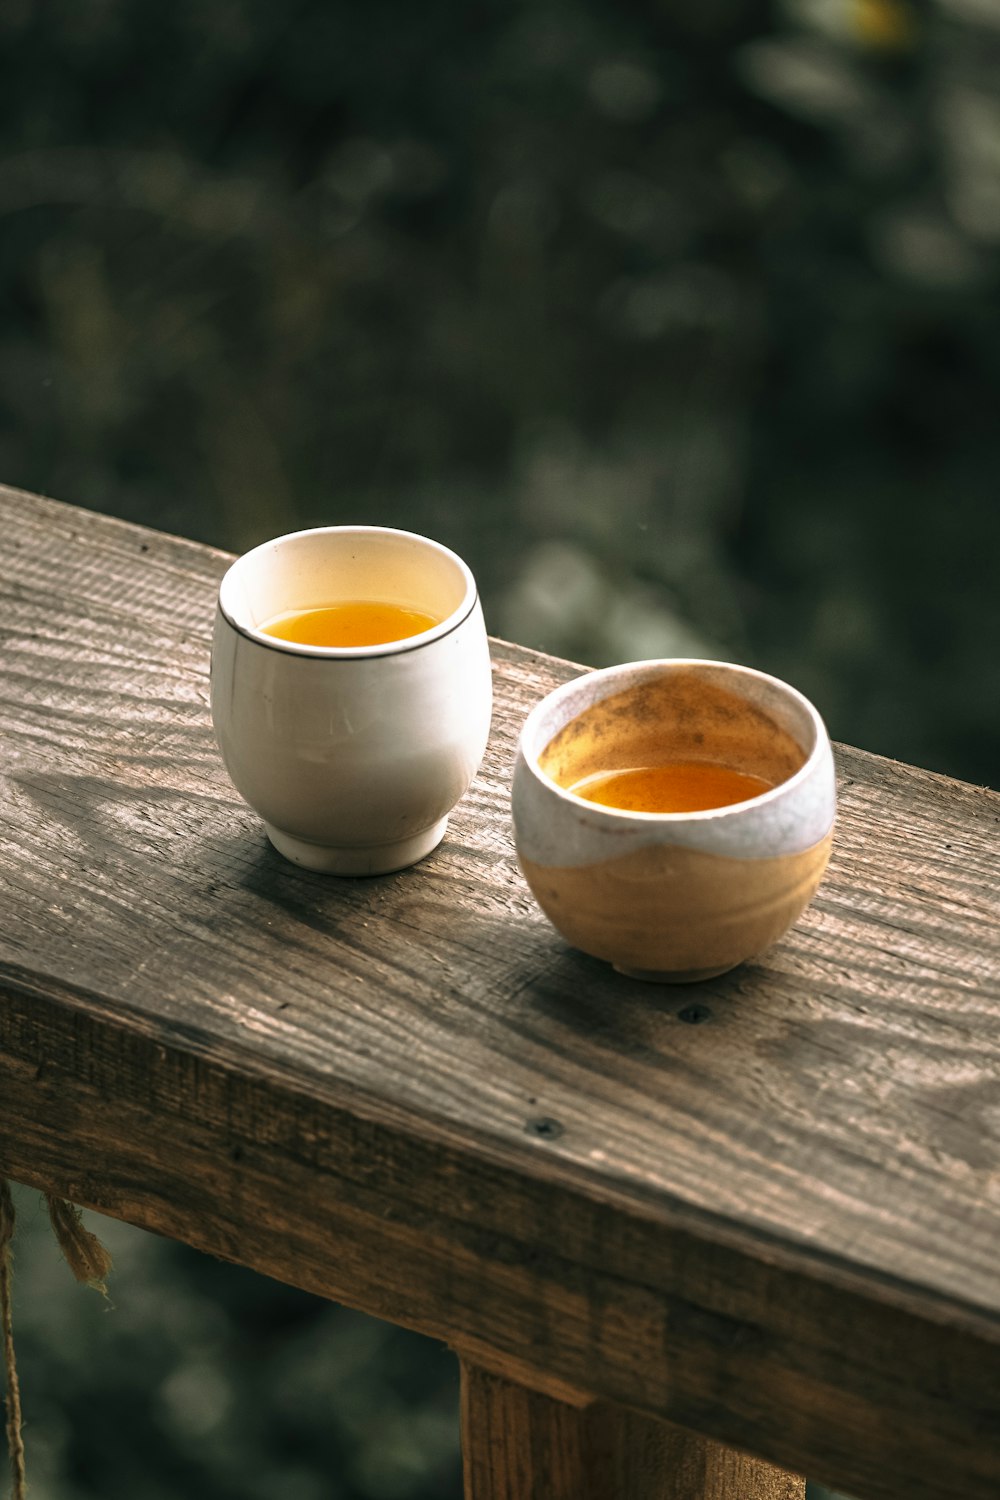 two bowls of tea sit on a wooden table